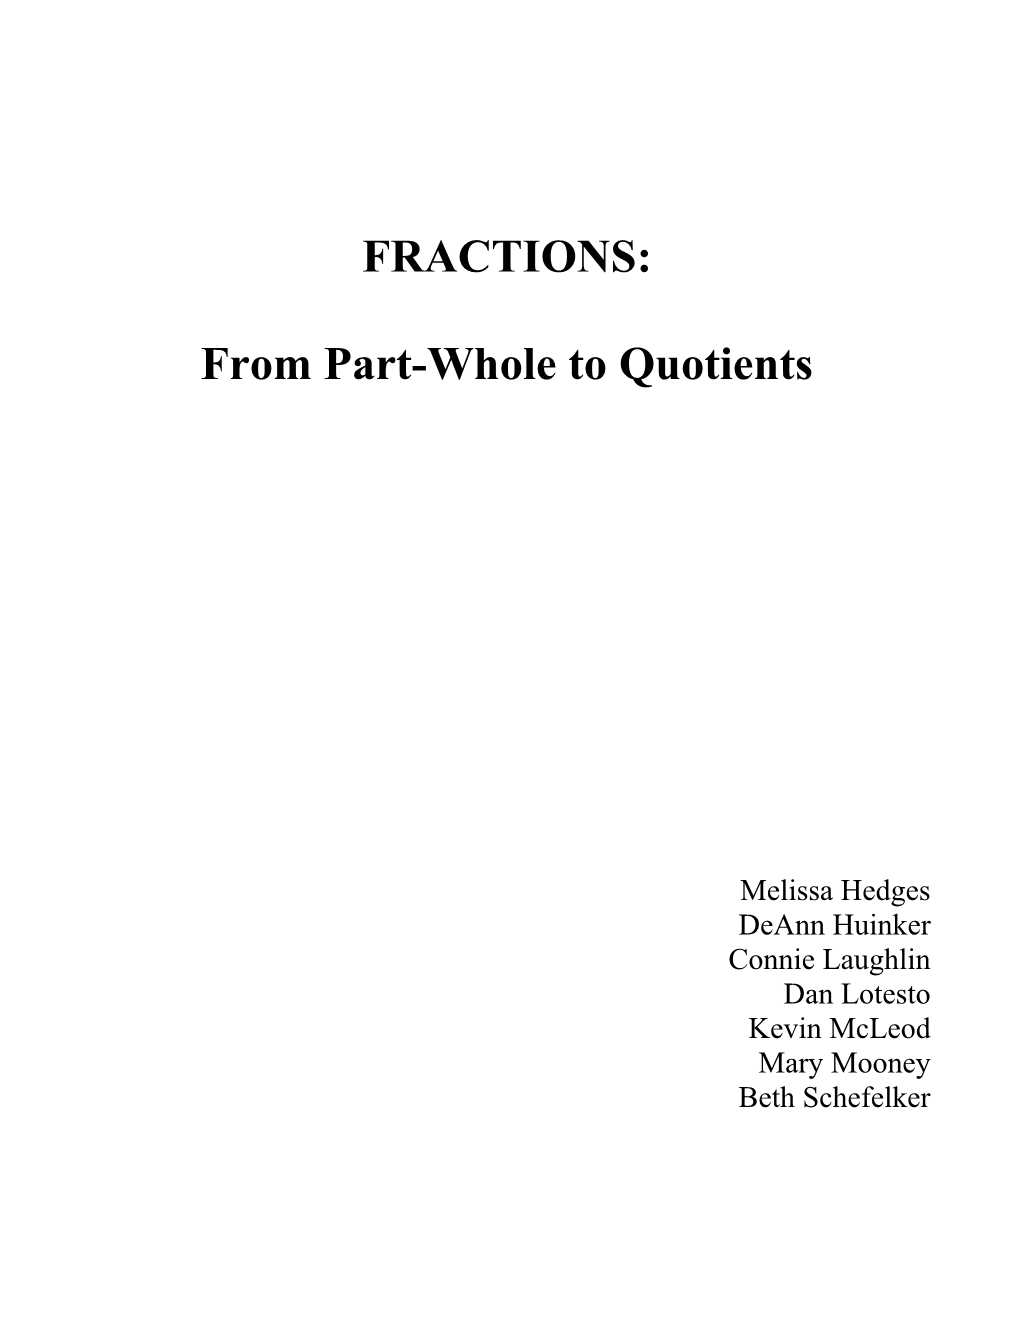 From Part-Whole to Quotients